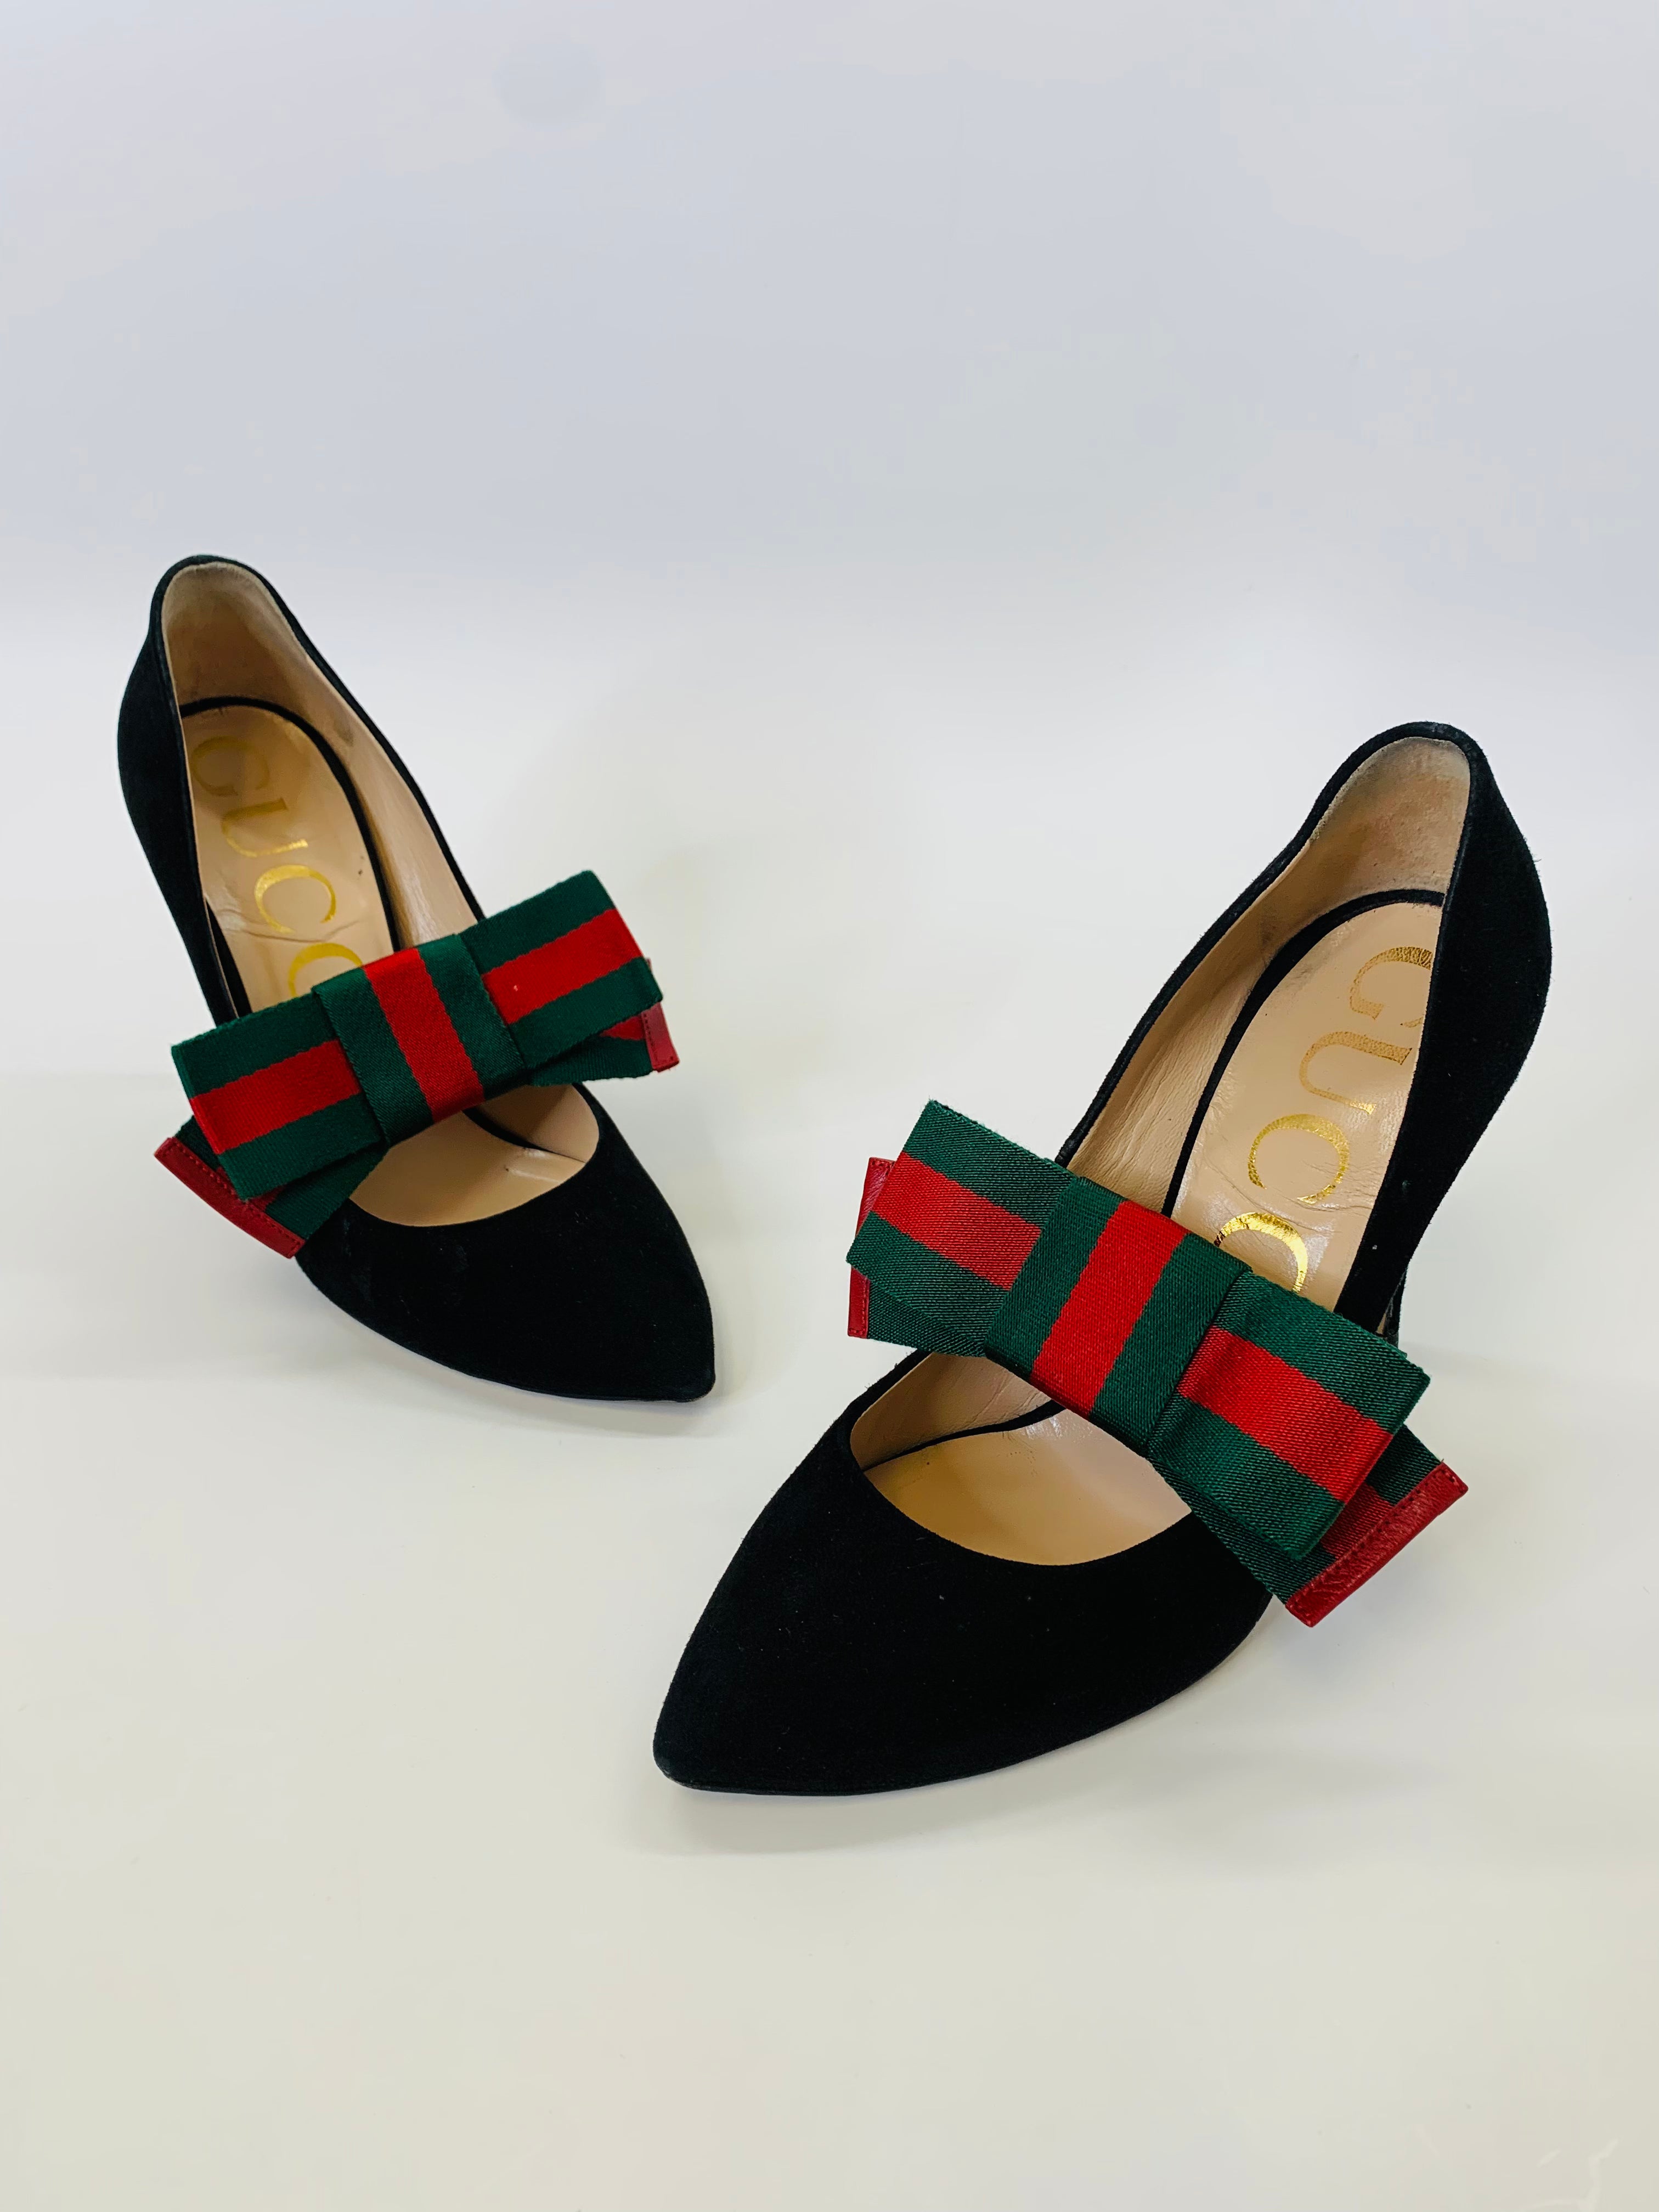 Gucci Web Bow Slide Sandals in Black Size 36